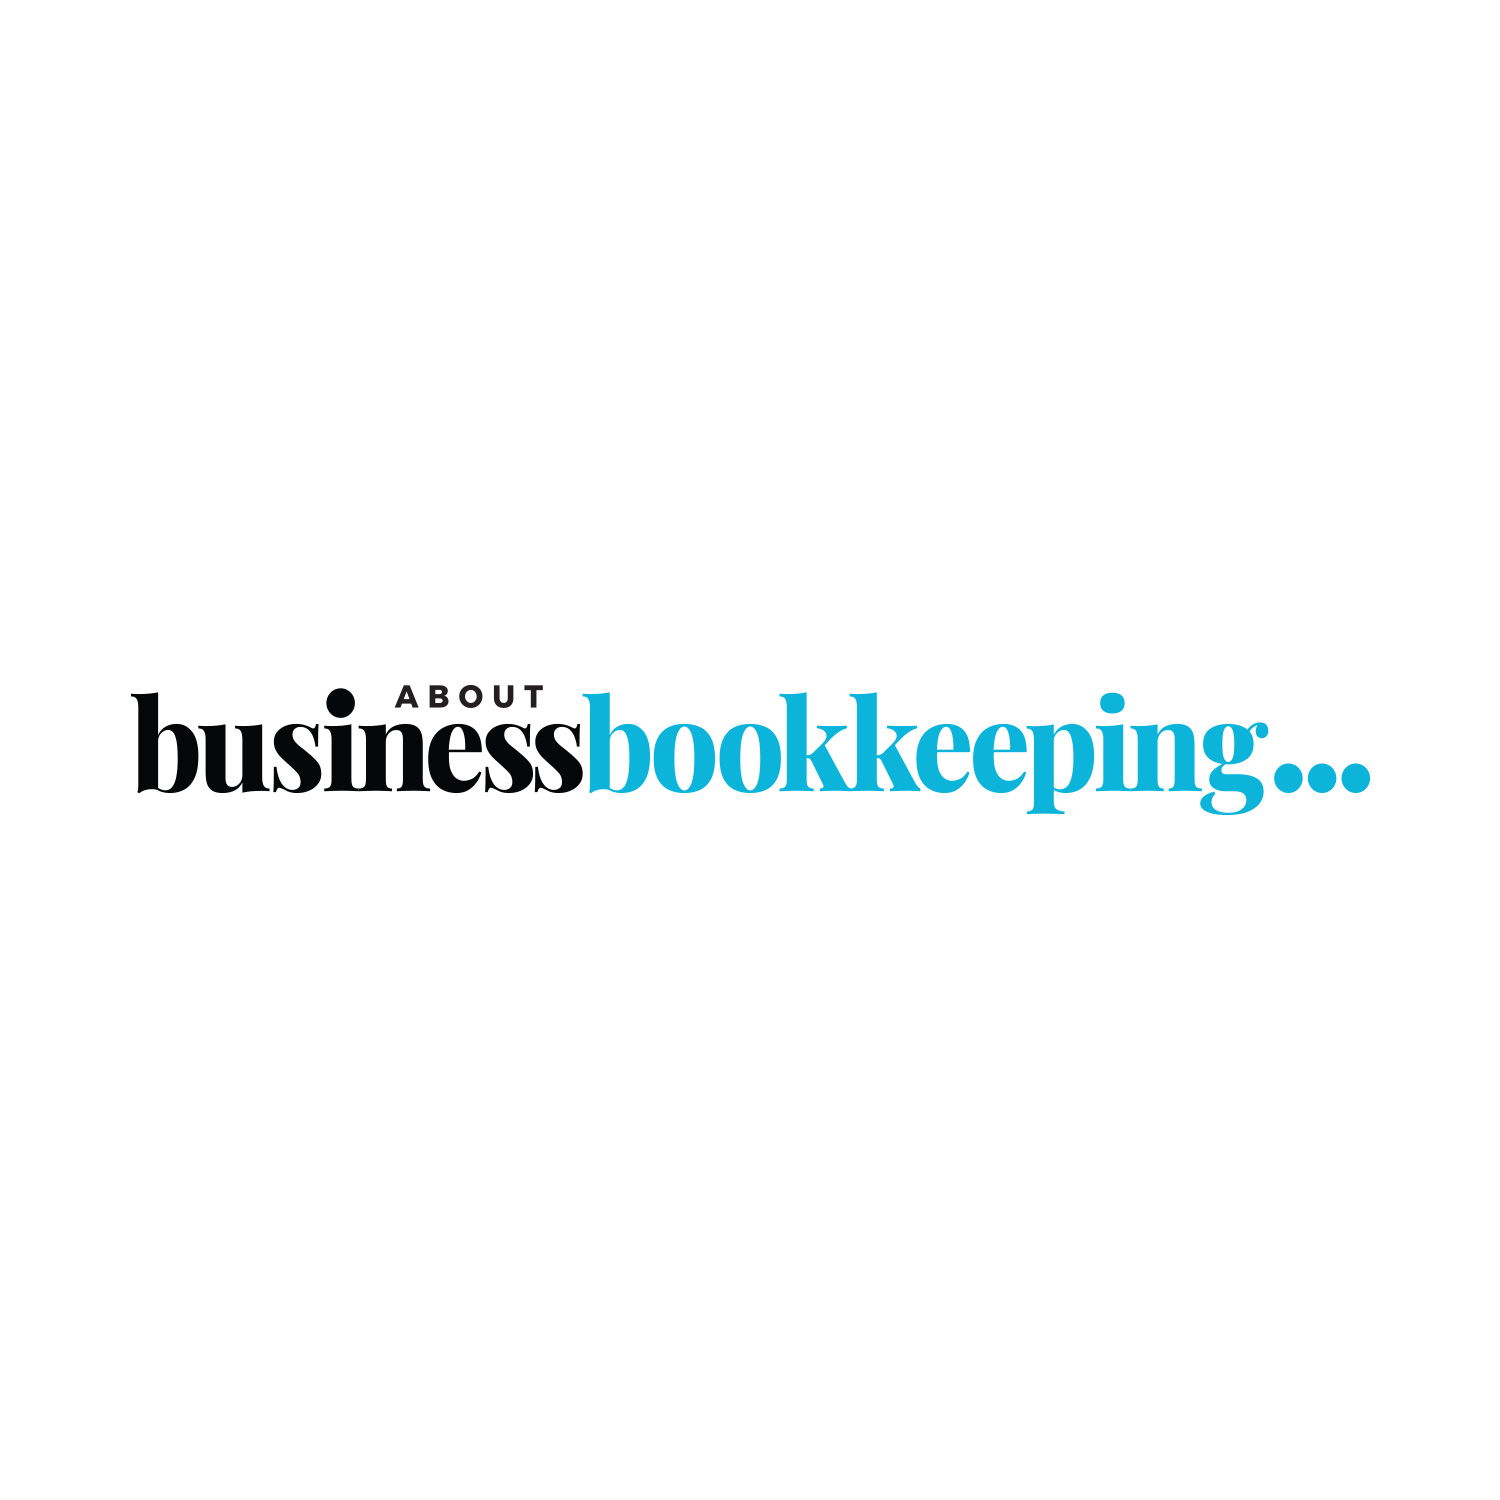 About Business Bookkeeping